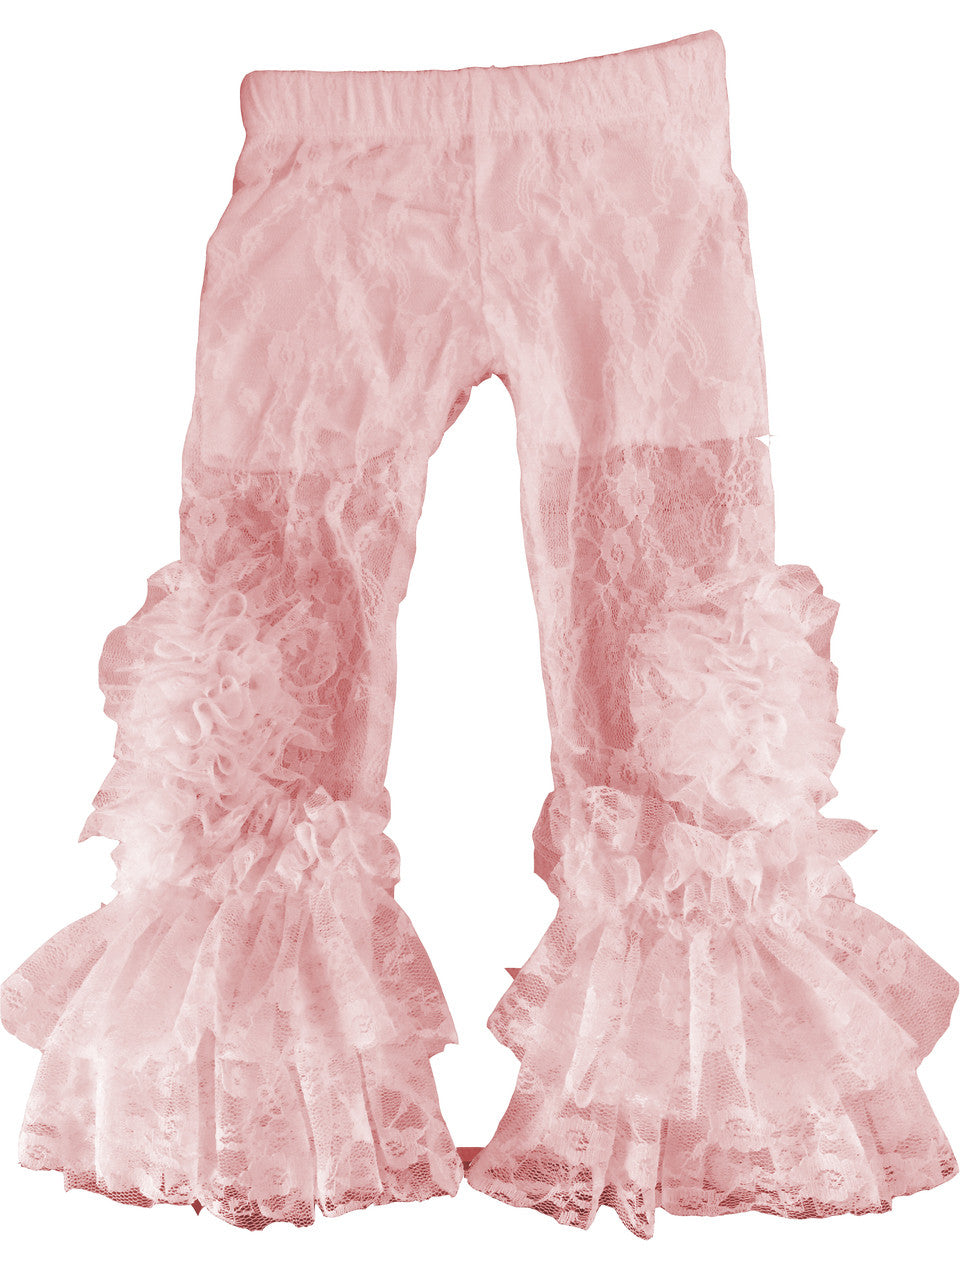 Peony Legging Pink All lace with cover up